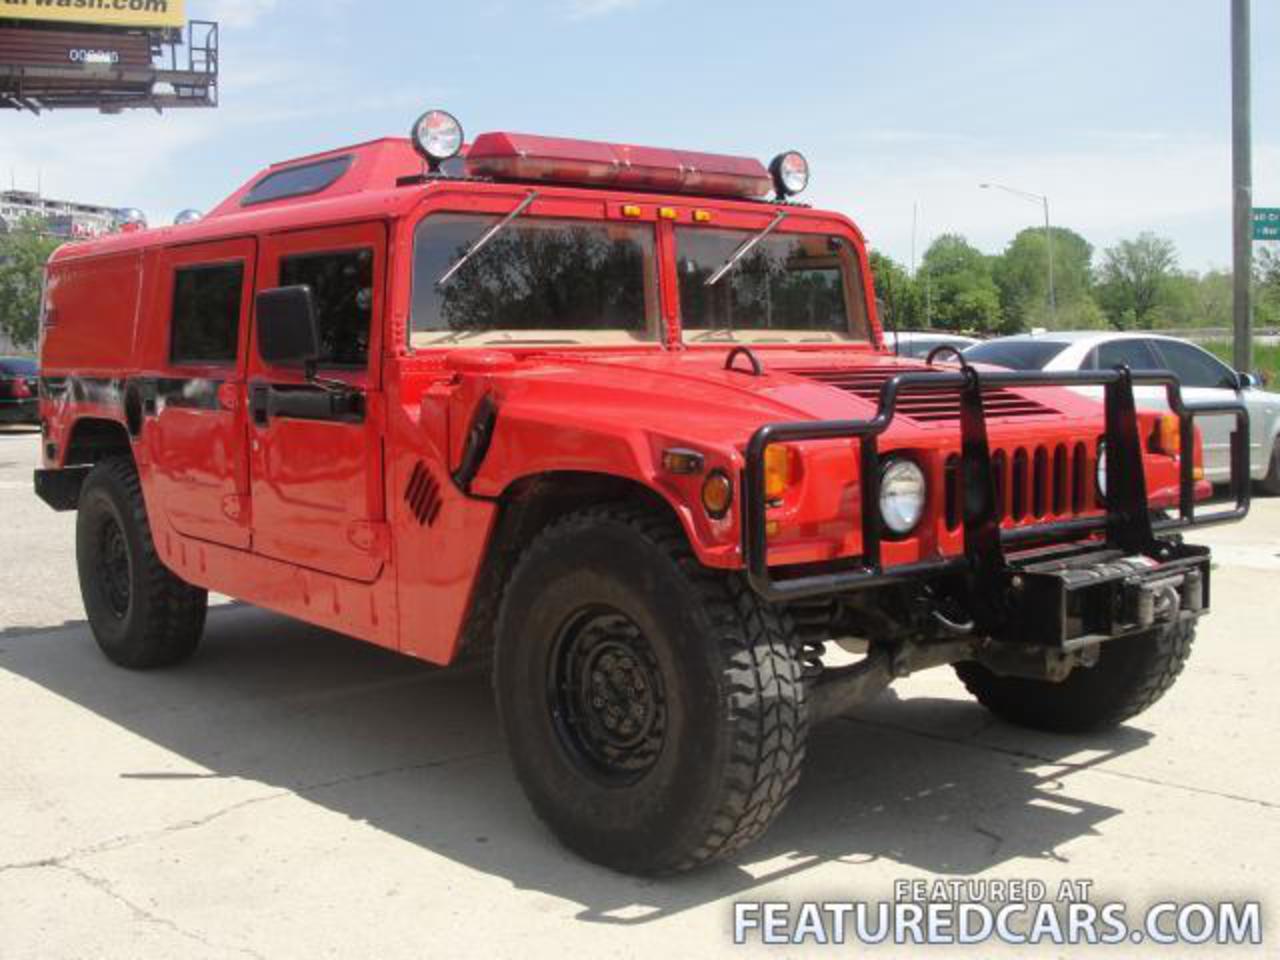 am general hummer related images,1 to 50 - Zuoda Images